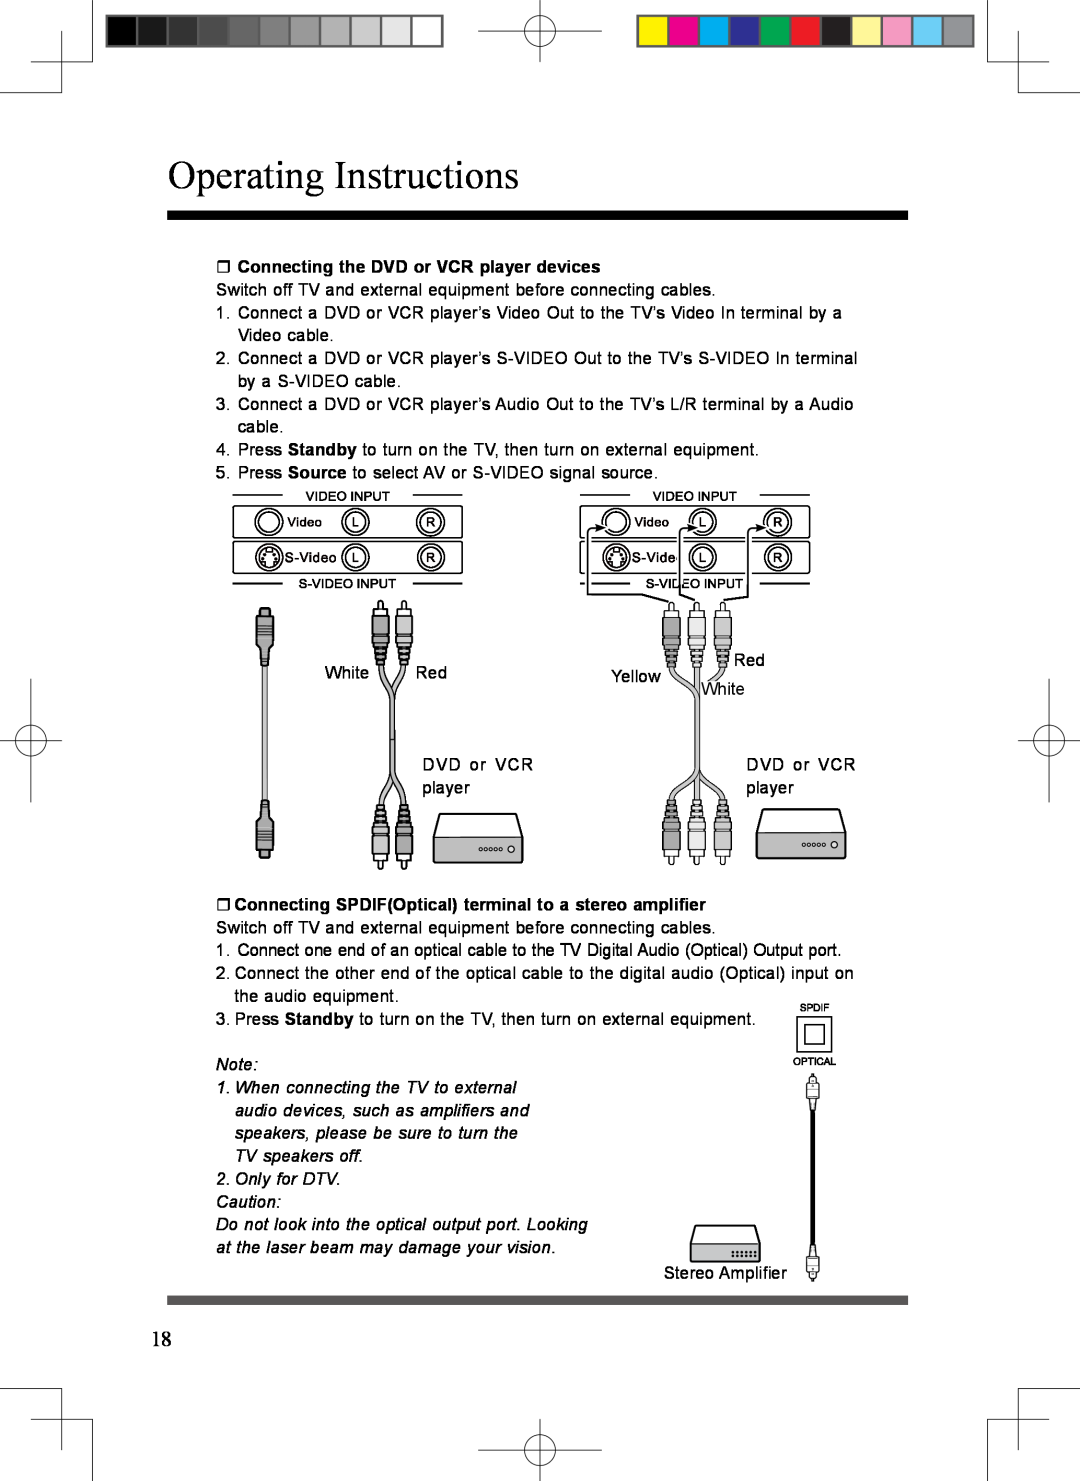 Scott LCT37SHA manual  Connecting the DVD or VCR player devices,  Connecting SPDIFOptical terminal to a stereo amplifier 